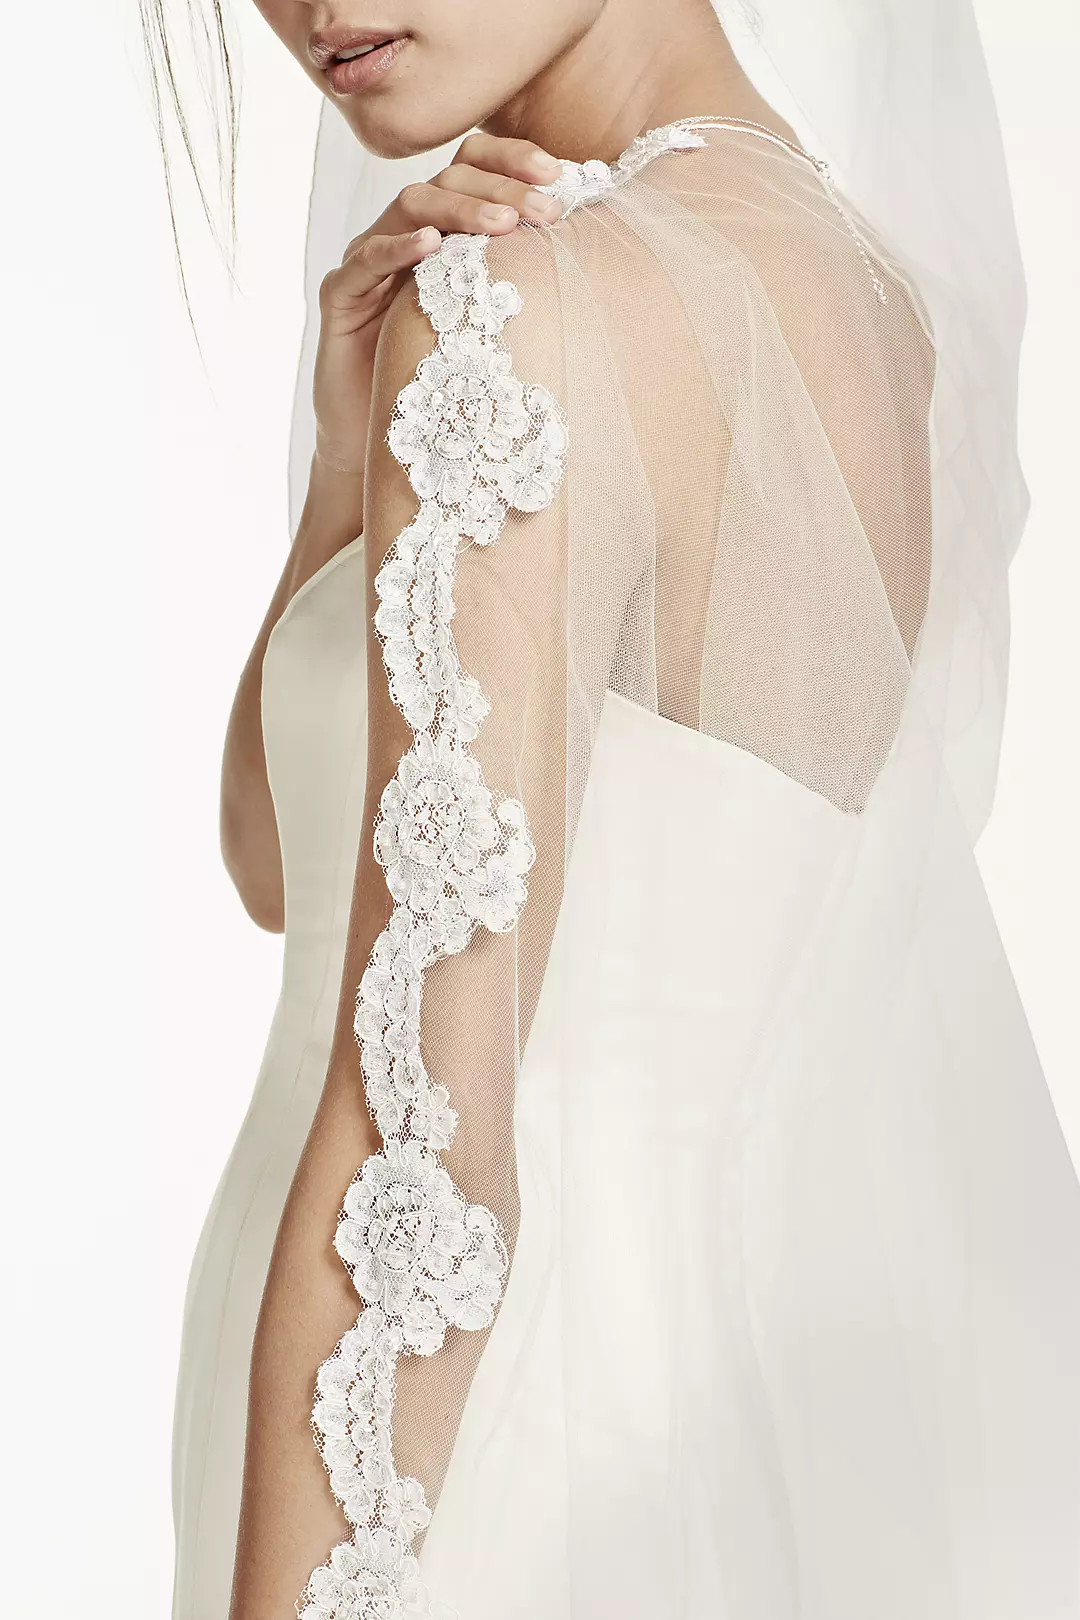 Bridal Veil with Pearls and Alencon Lace Edge Image